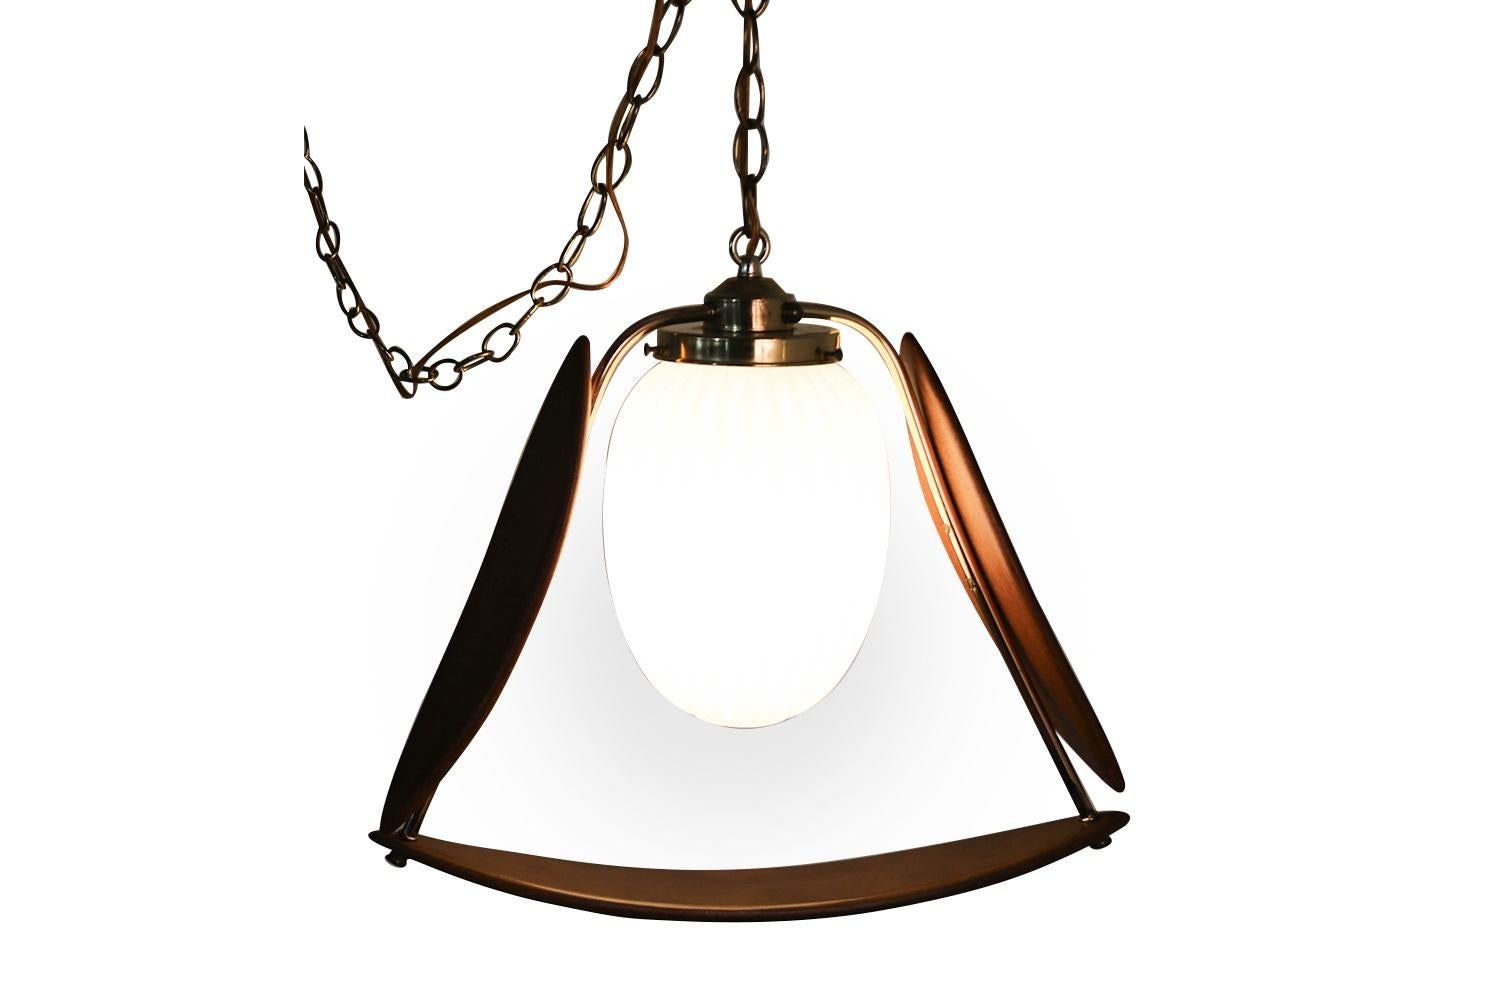 A sophisticated, interesting Mid-Century Modern pendant light, swag lamp, chandelier featuring a milky white glass globe with a raised ribbing that follows the billowing egg shaped globe. The globe is framed in a triangular form by three gorgeous